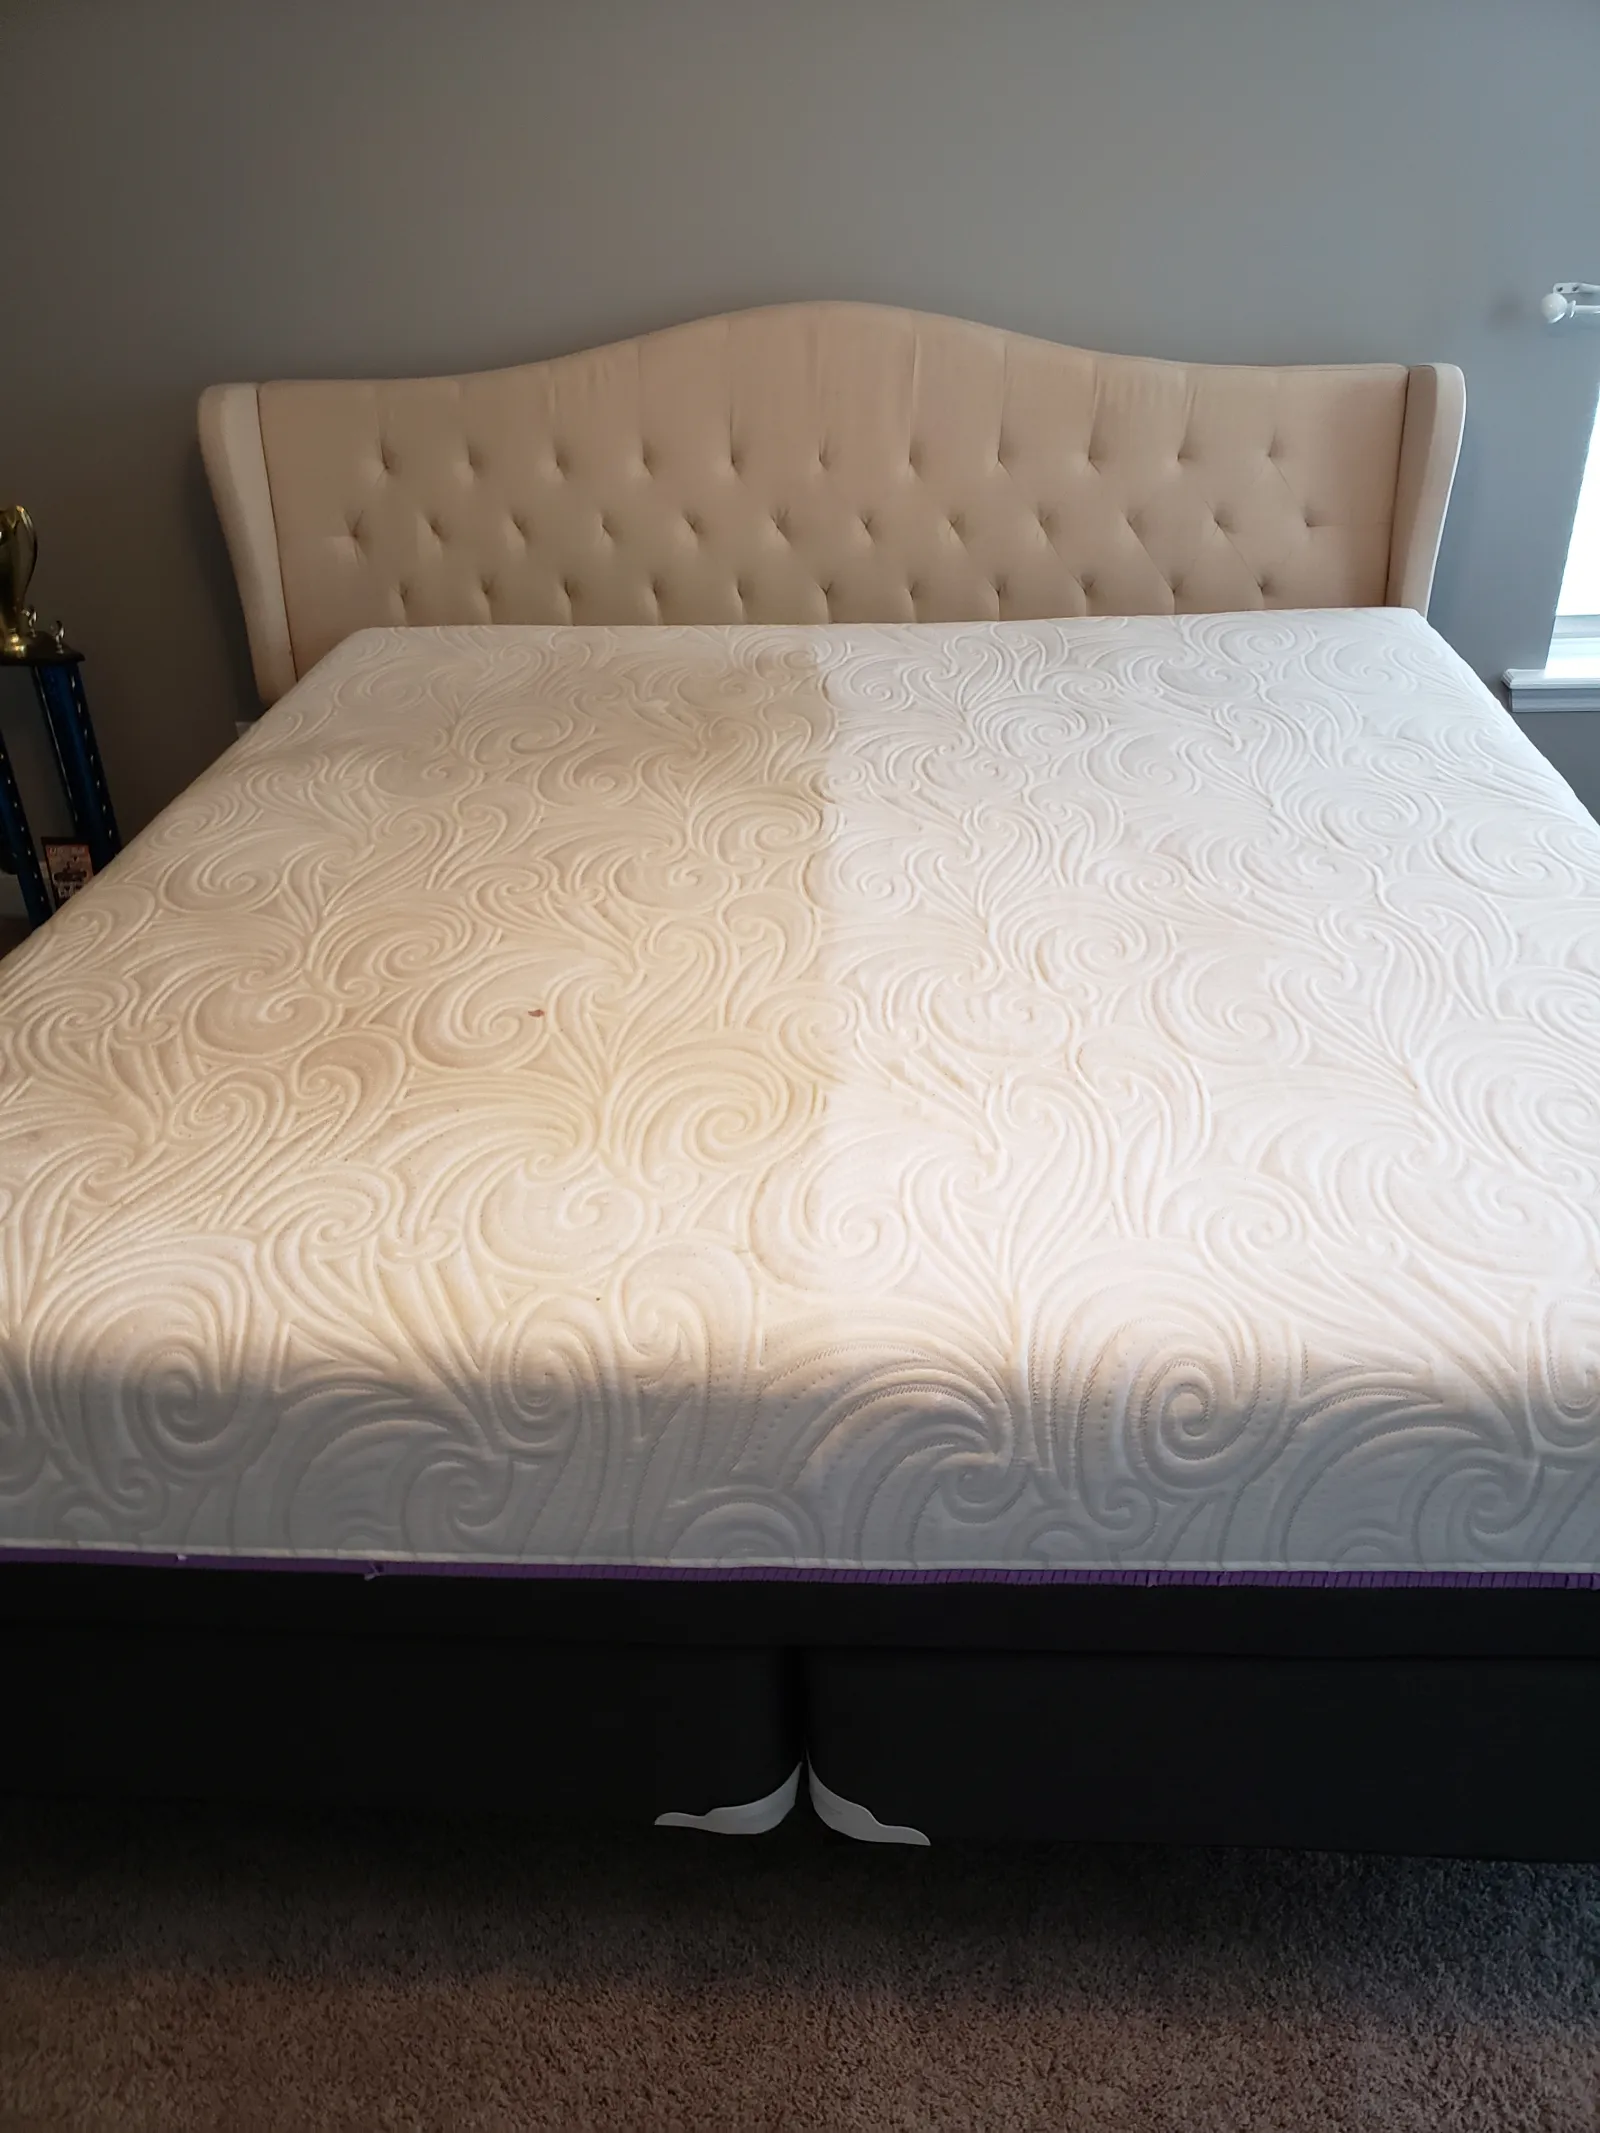 bare queen size mattress in a bedroom where the right side has been professionally deep cleaned by Zerorez and the left, dirty, yellow side, hasn't been